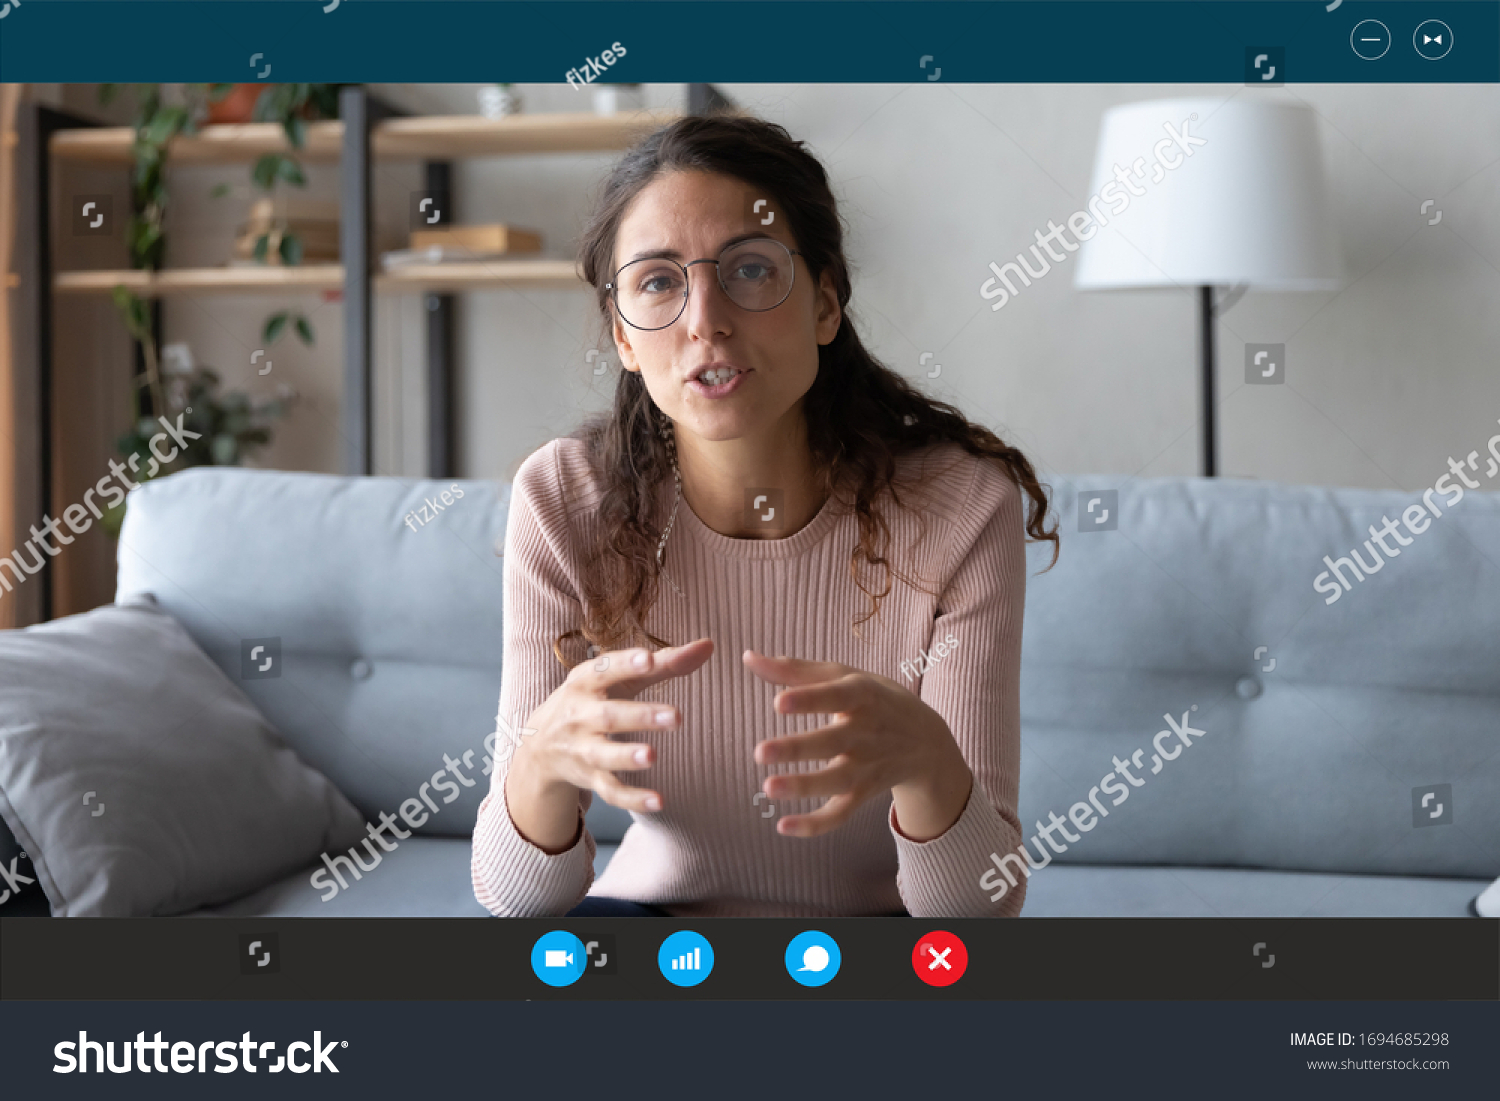 35s female teacher teach by video call explain educational material to trainee distantly seated on couch in living room at home. Friends communicating use videoconference app concept, pc screen view #1694685298